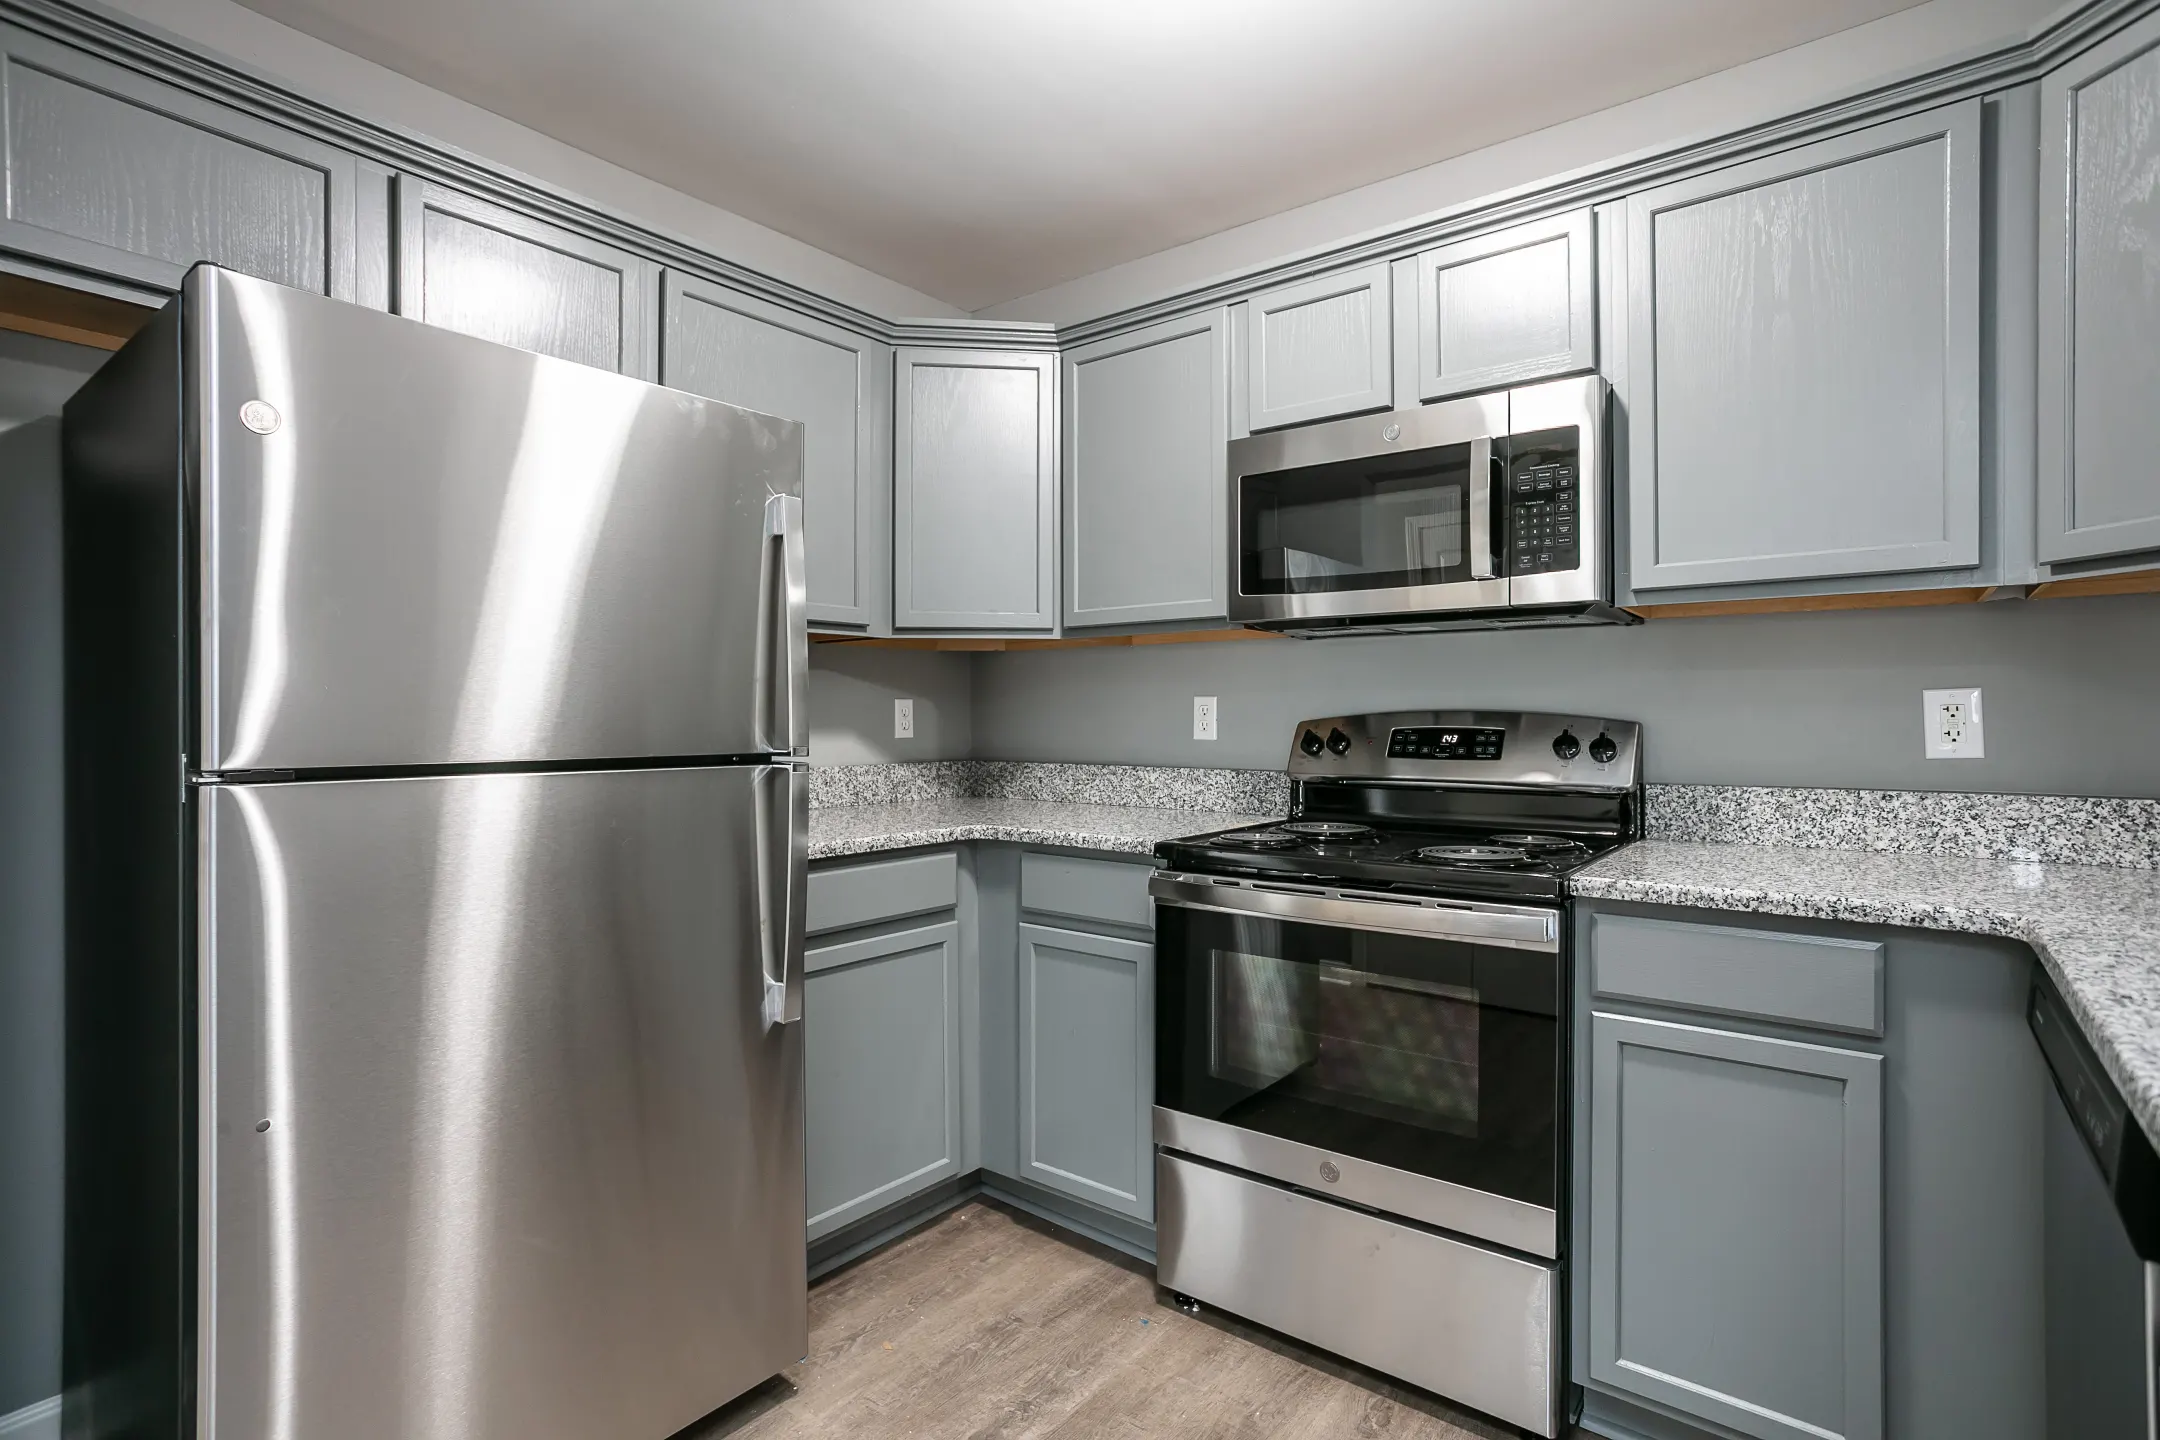 Kitchen - Polo Springs Apartments - Bardstown, KY